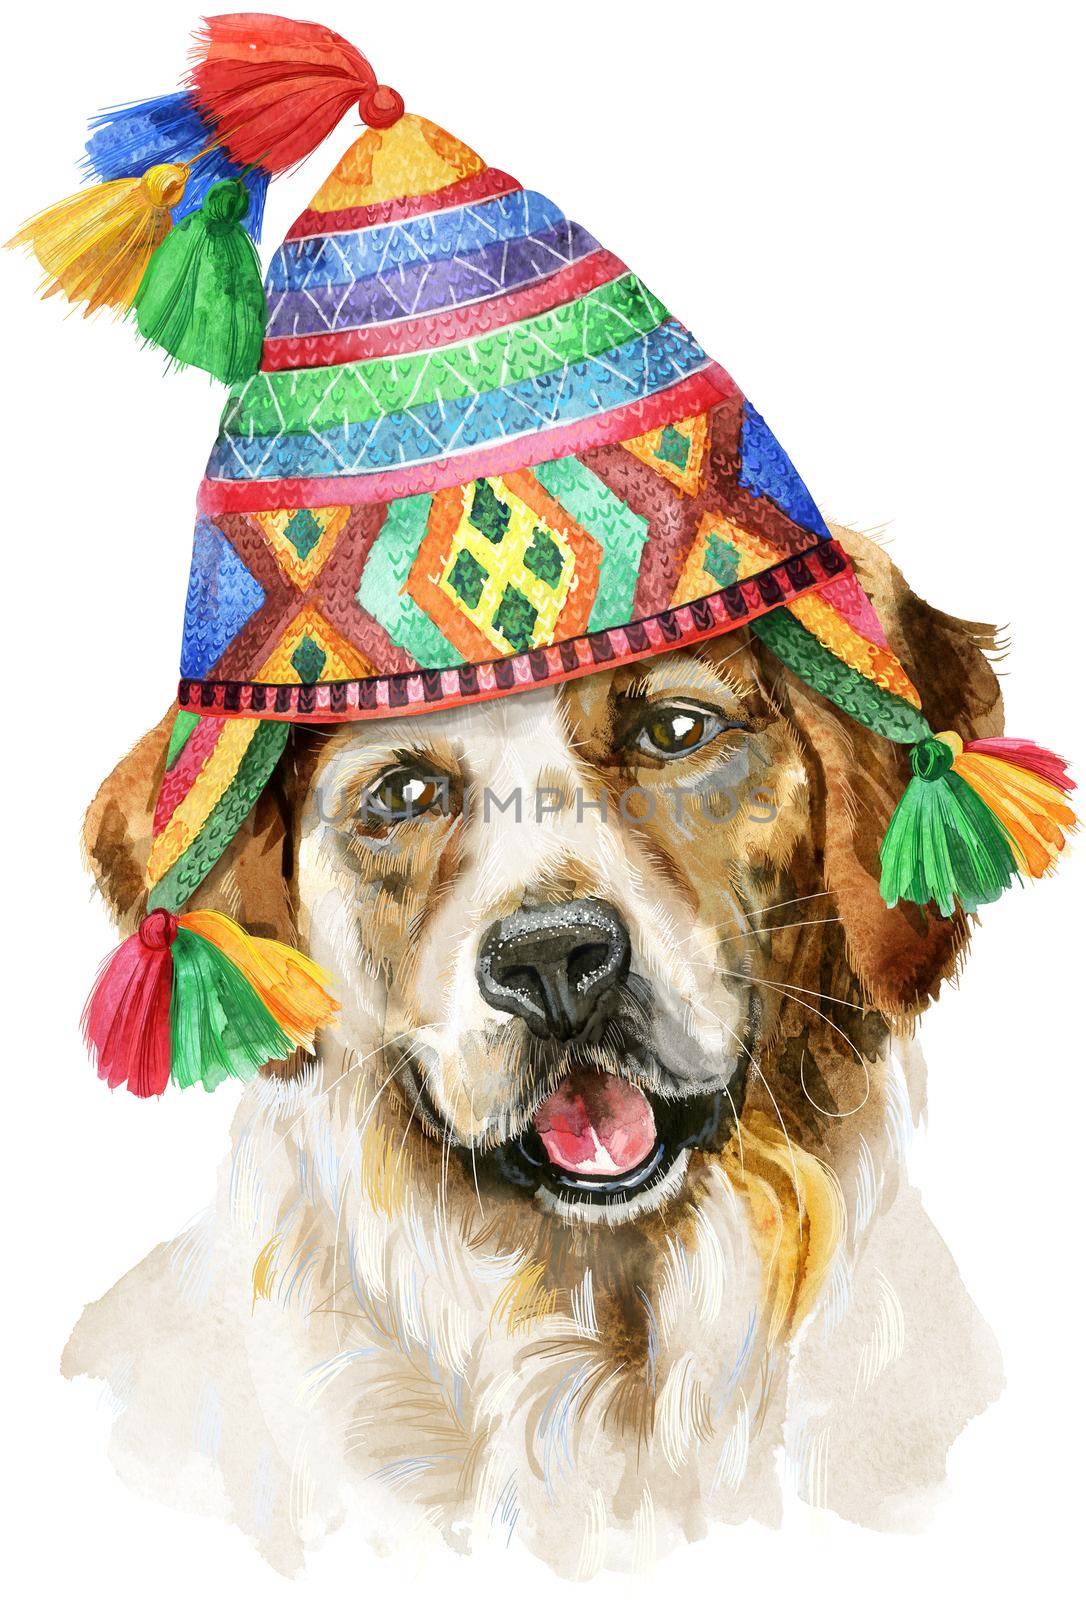 Watercolor portrait of tricolor dog in chullo hat by NataOmsk